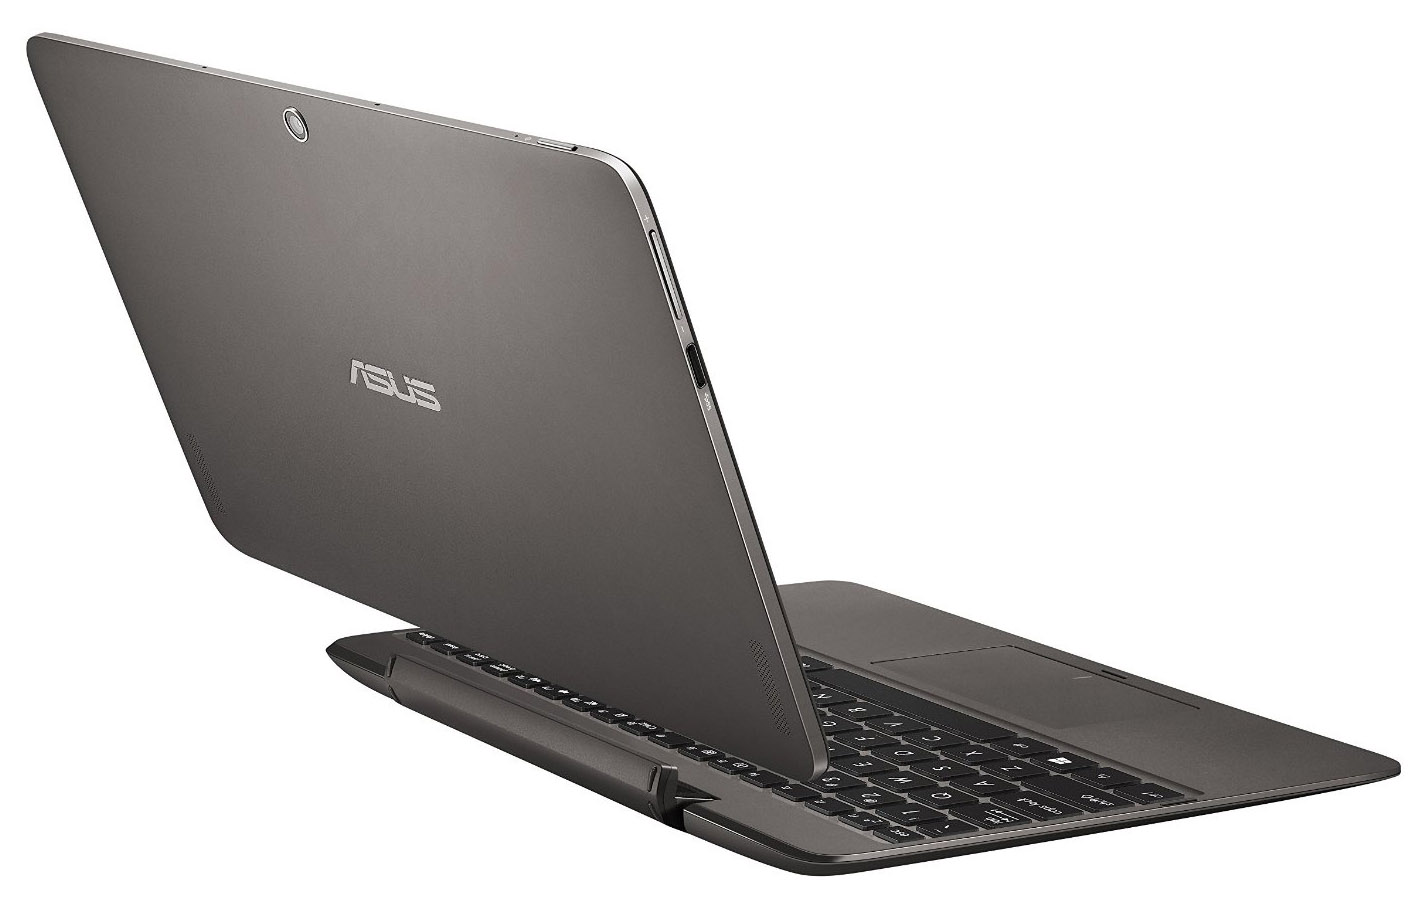 ASUS Transformer Book T100HA - Specs, Tests, and Prices 